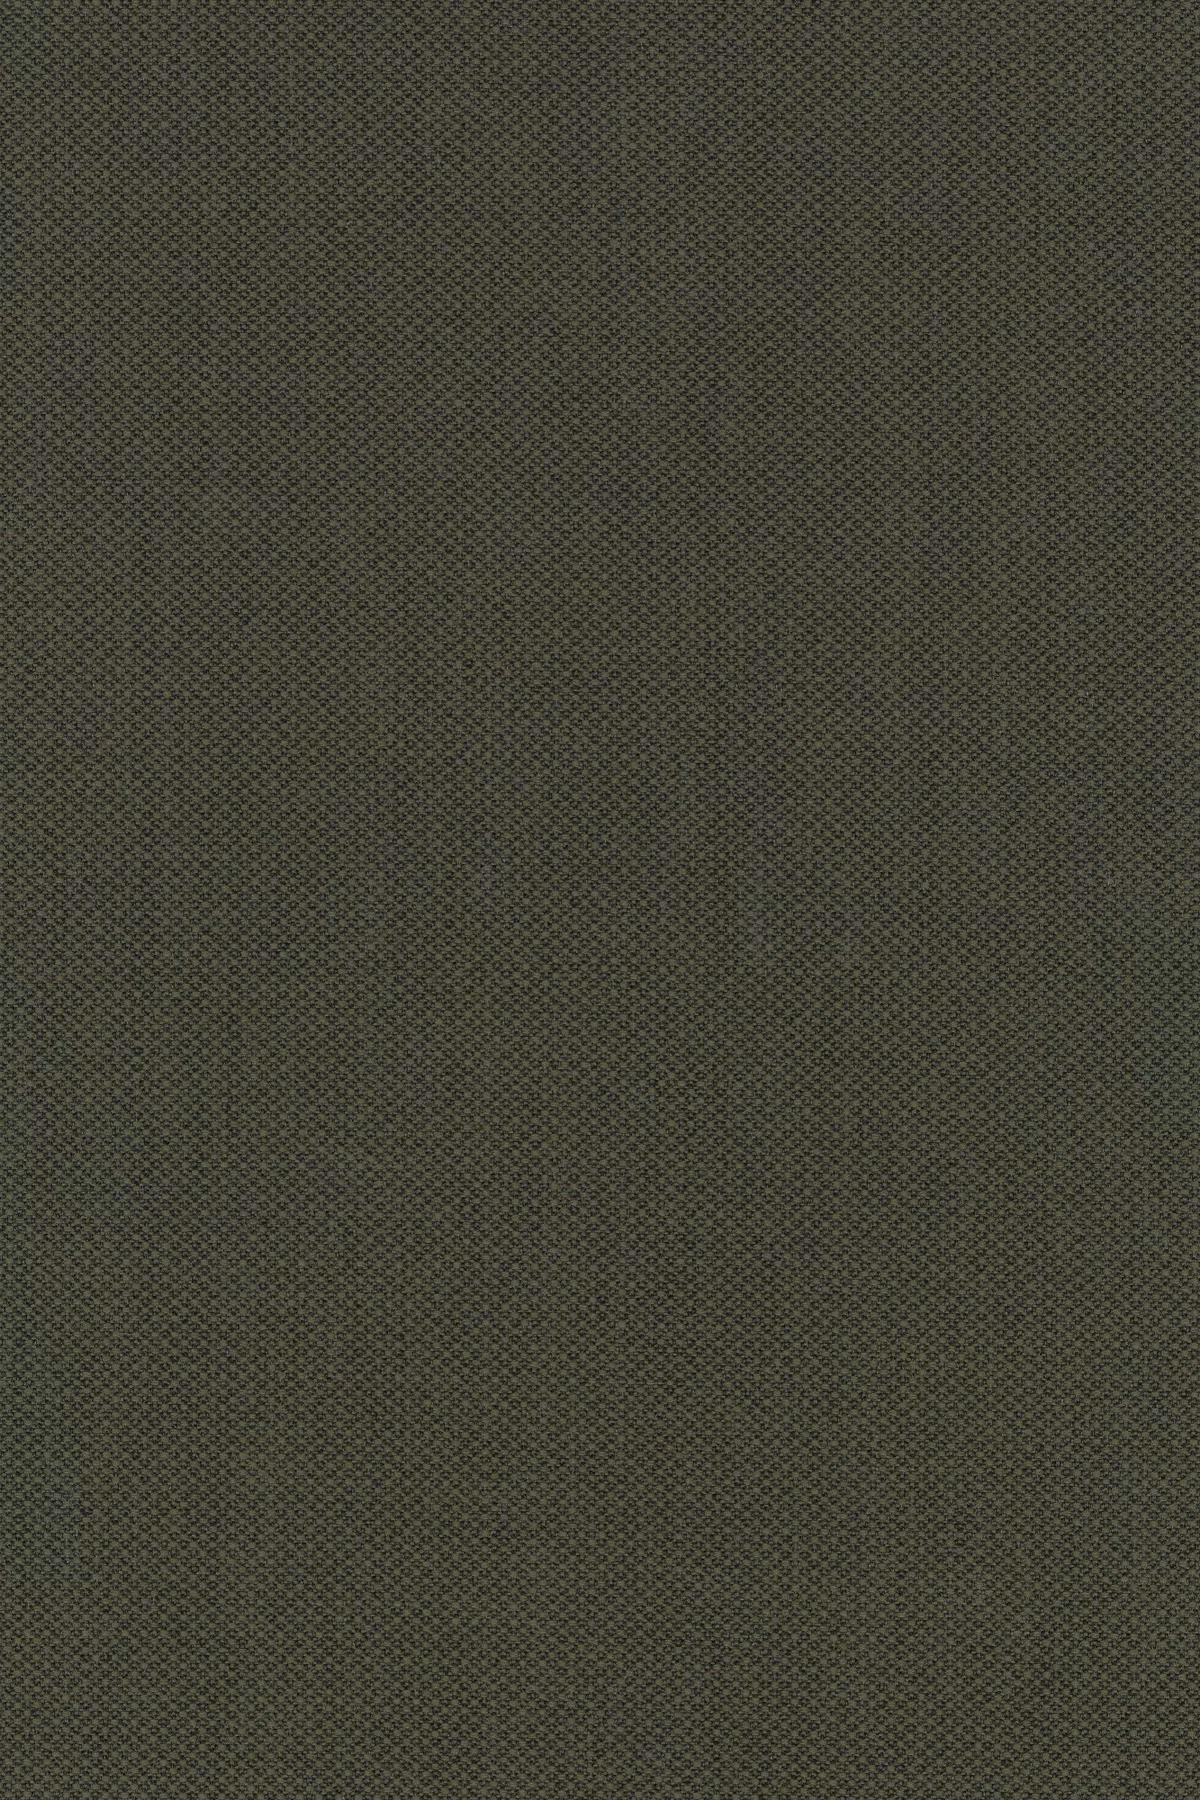 Fabric sample Fiord 961 brown